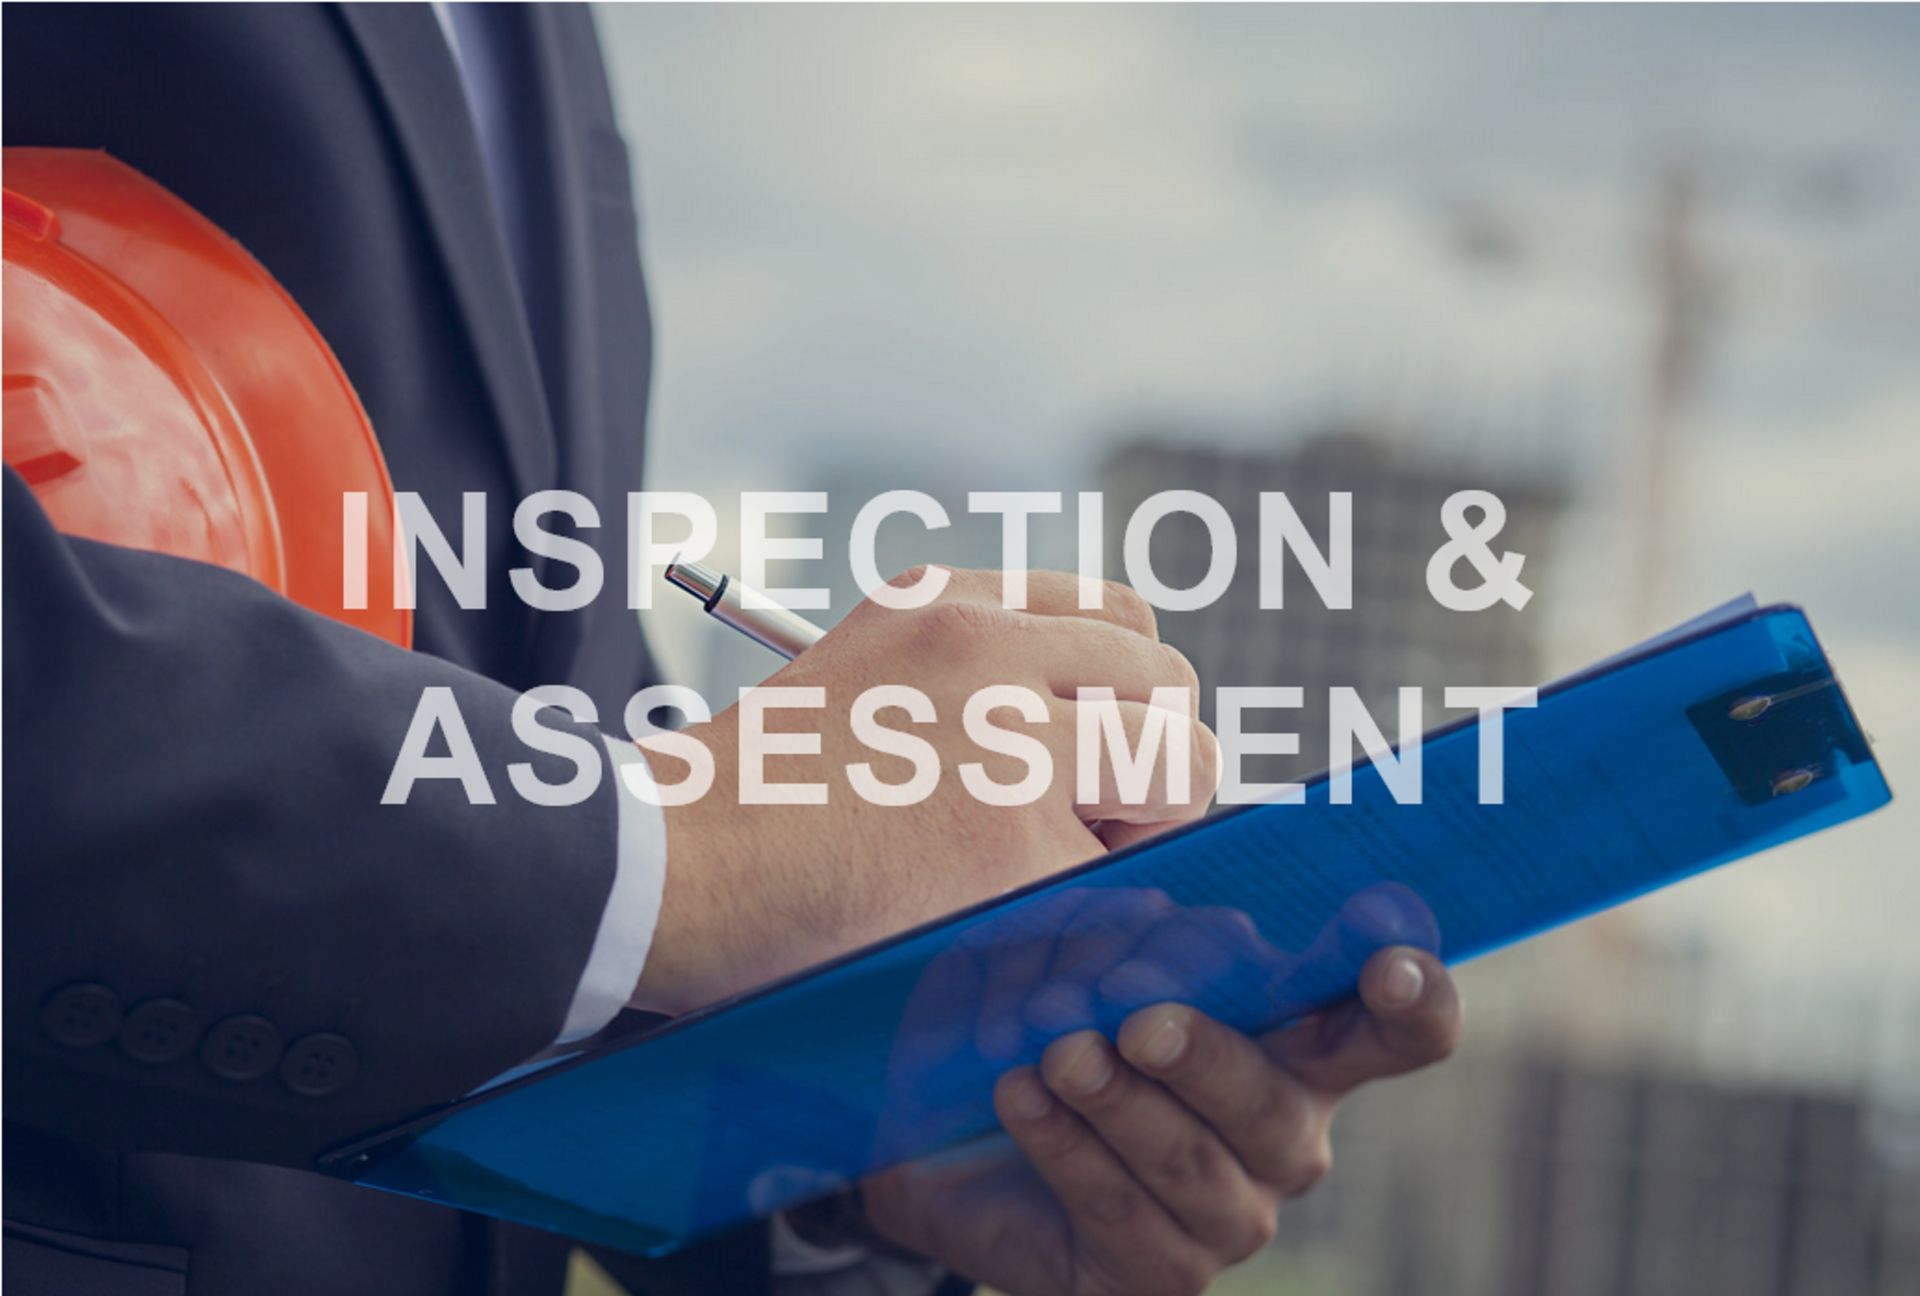 There Will Be A Public Inspection Wednesday August 10 From 9:00 - Noon.